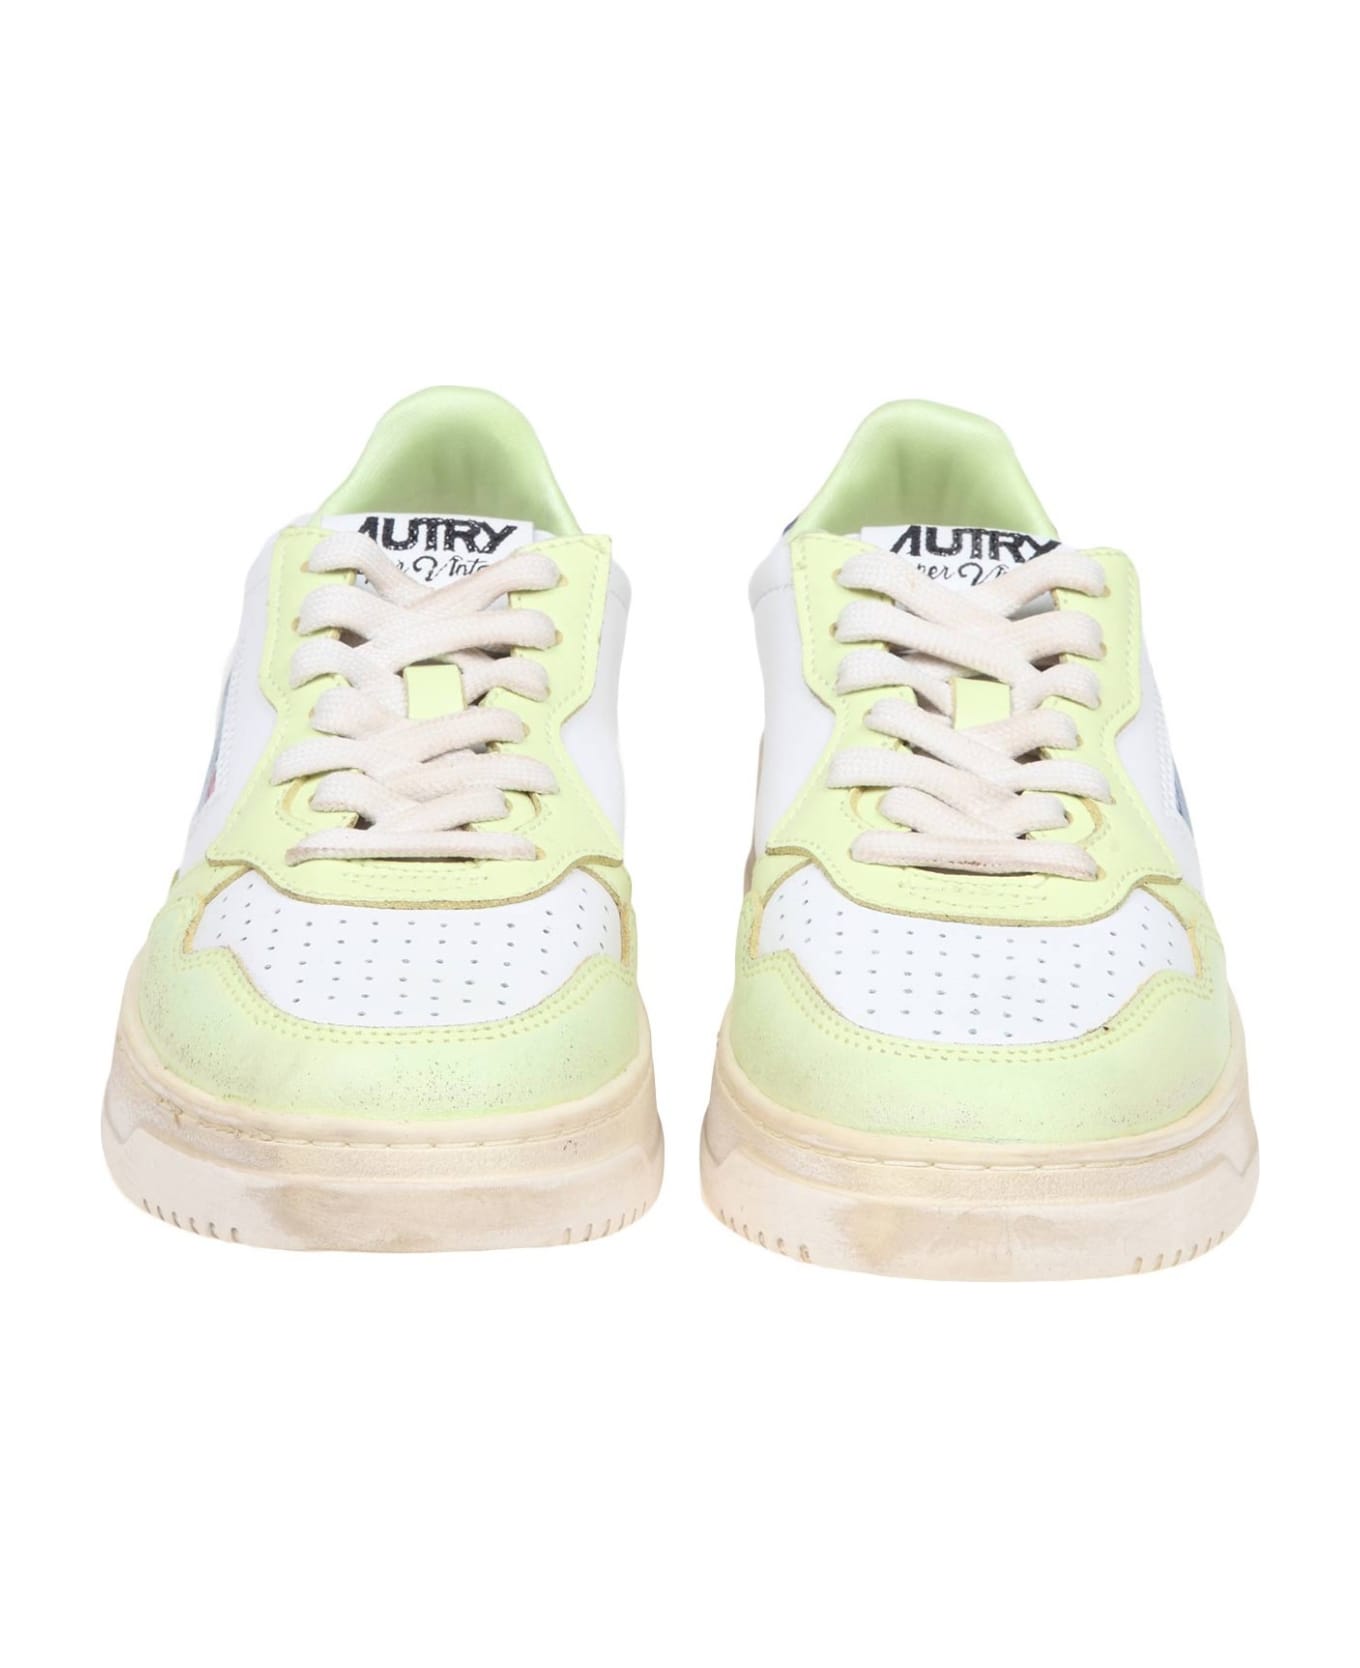 Autry Sneakers In Super Vintage Leather - Wht/slm/mprp